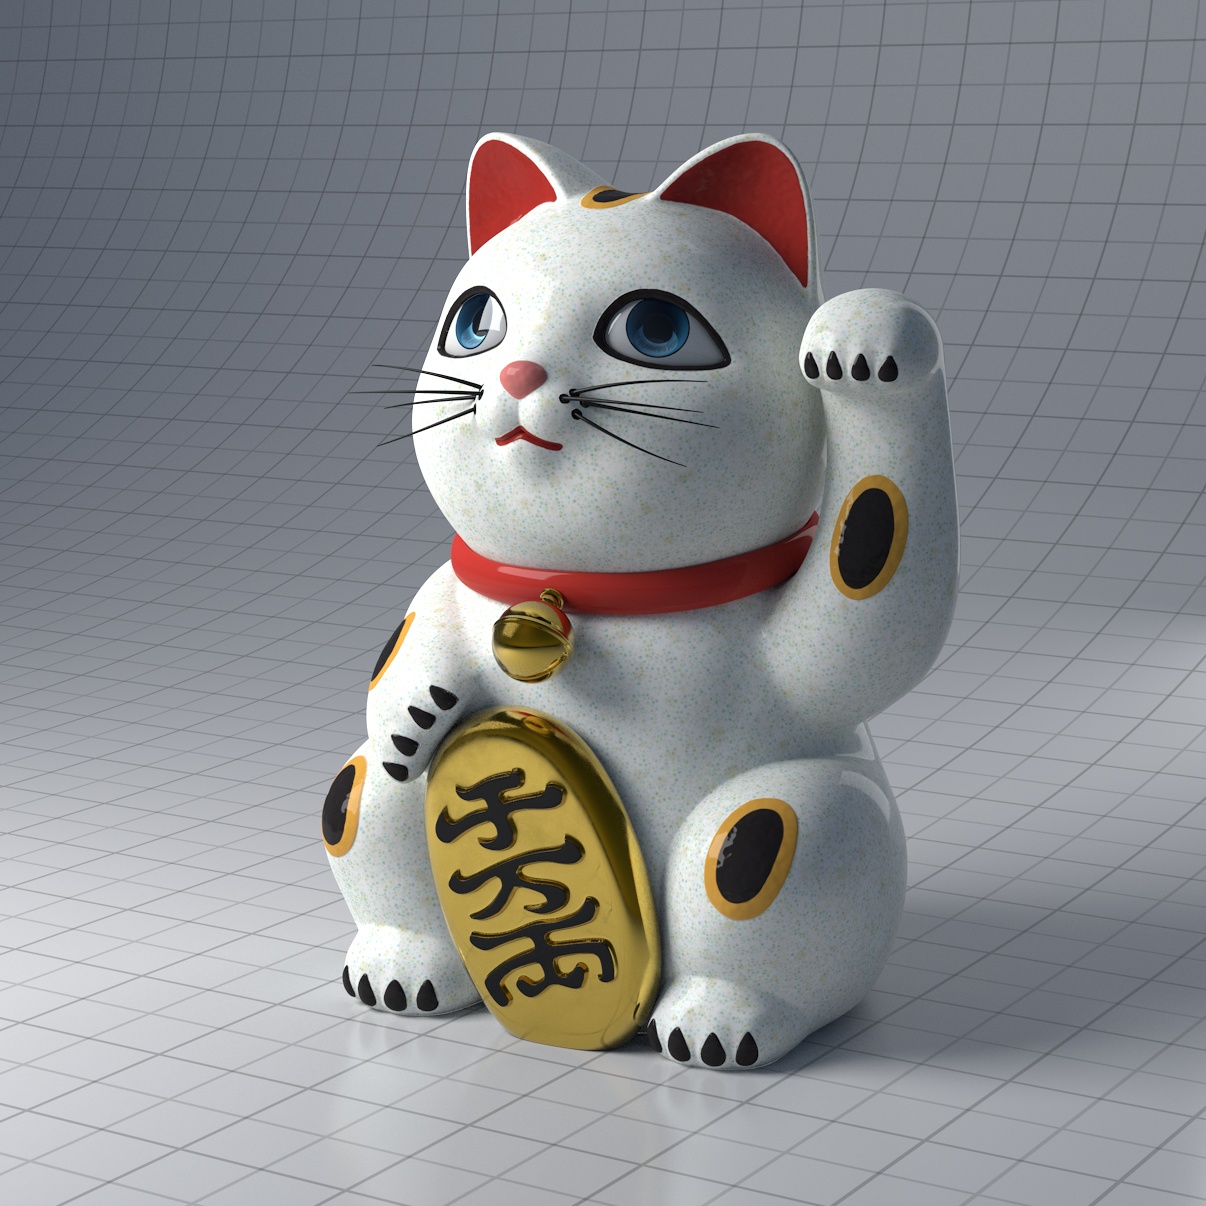 Maneki - all-in-one solution for next 